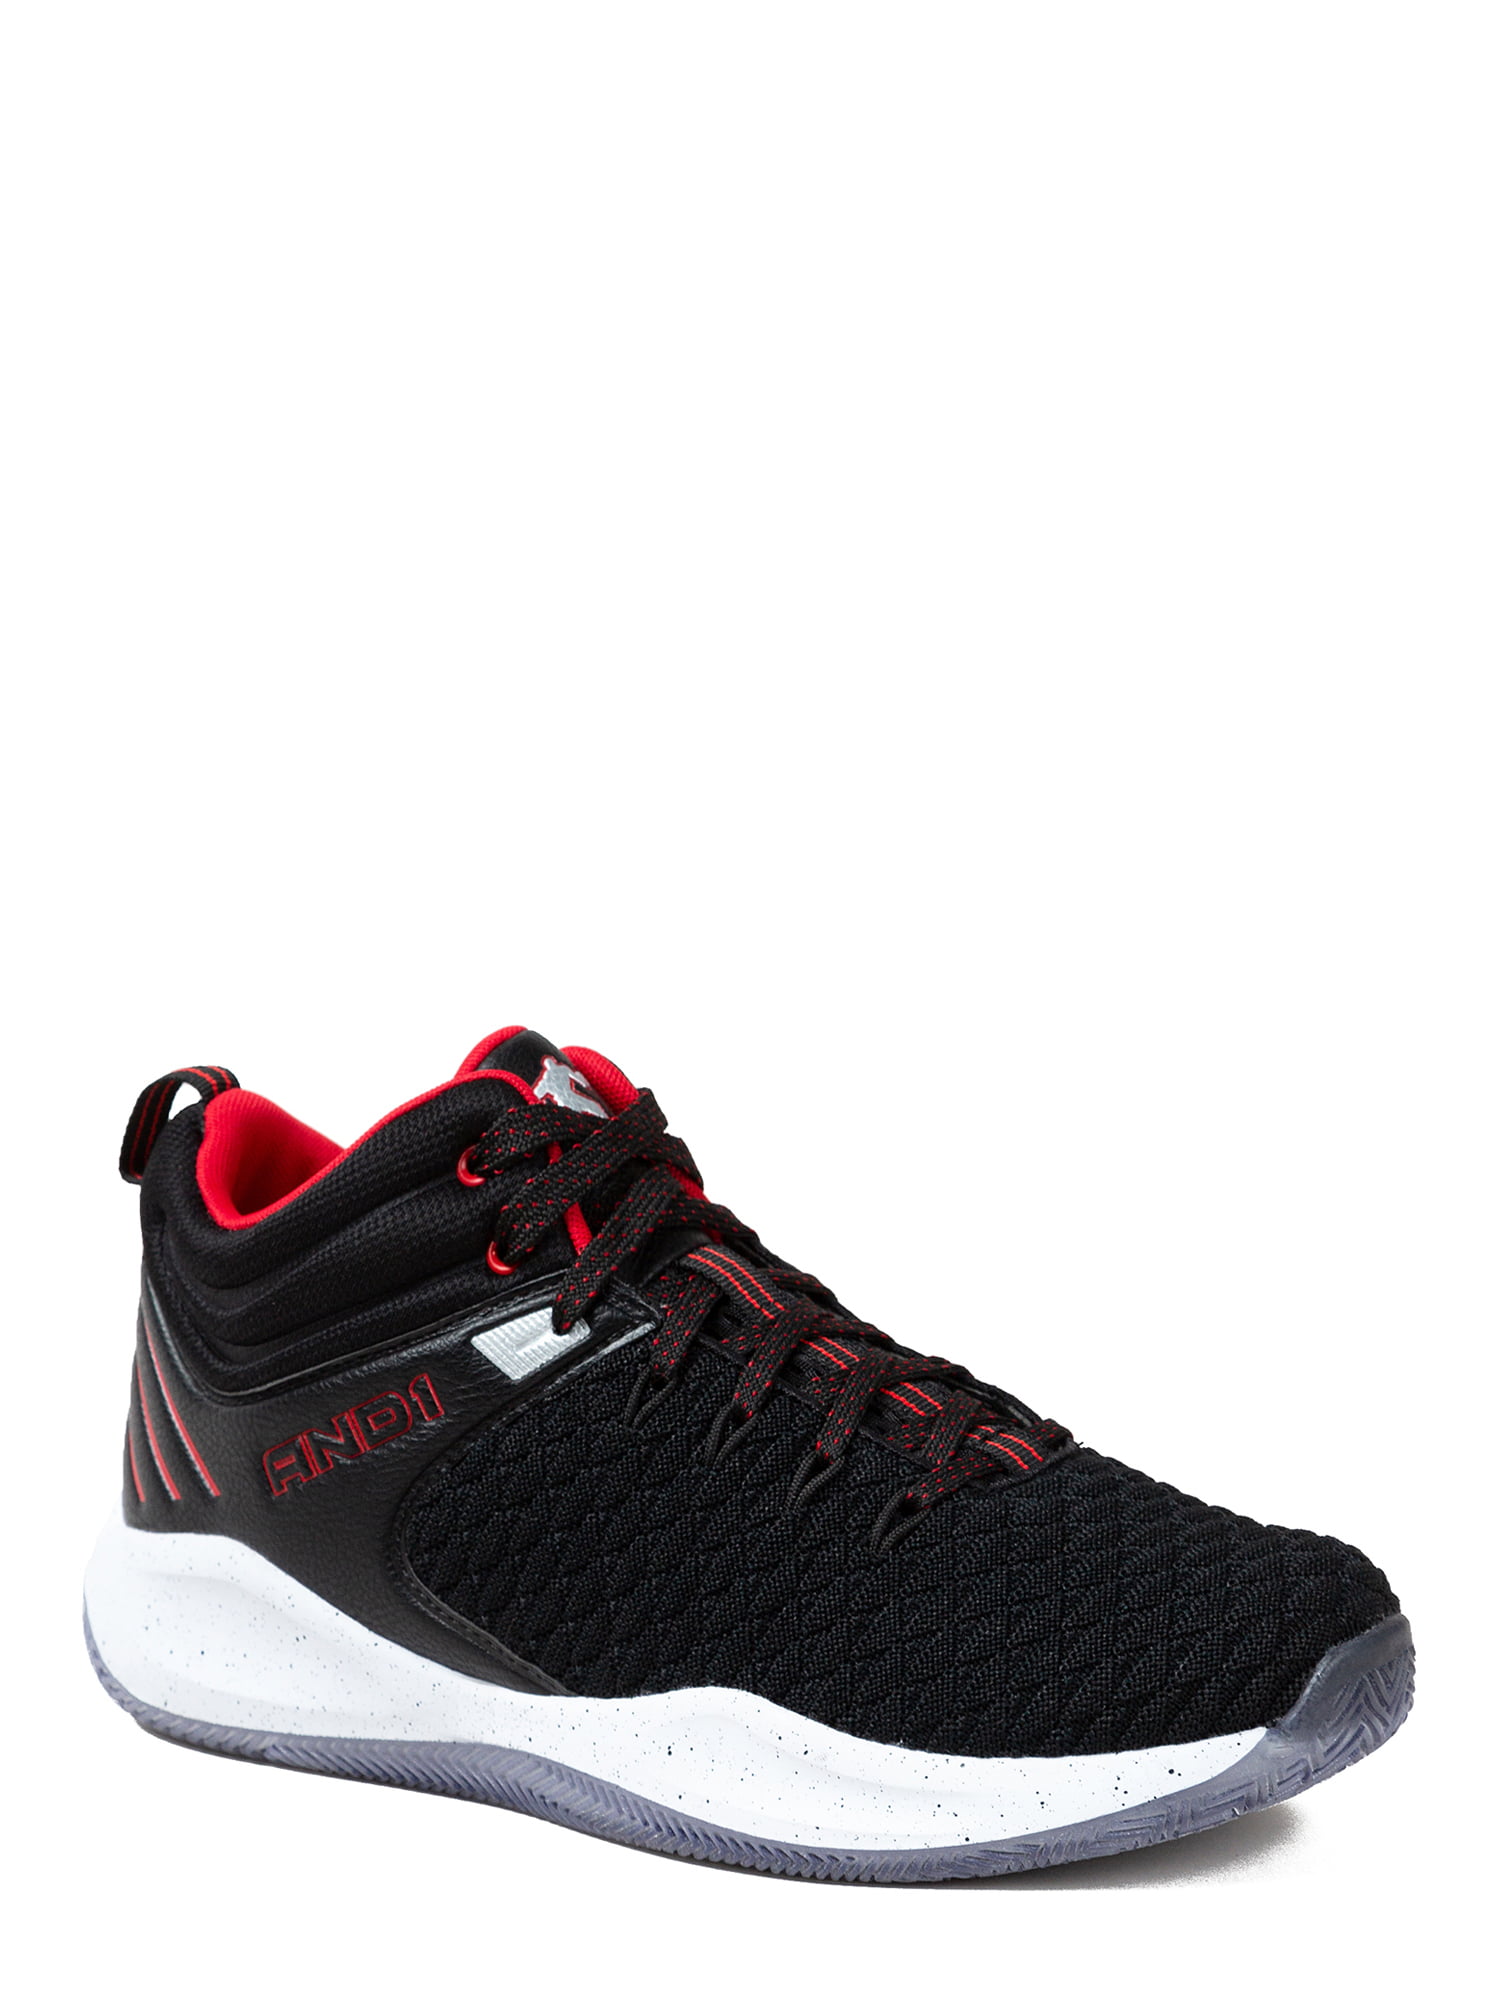 AND1 - AND1 Men's Knit BB Athletic Shoe 